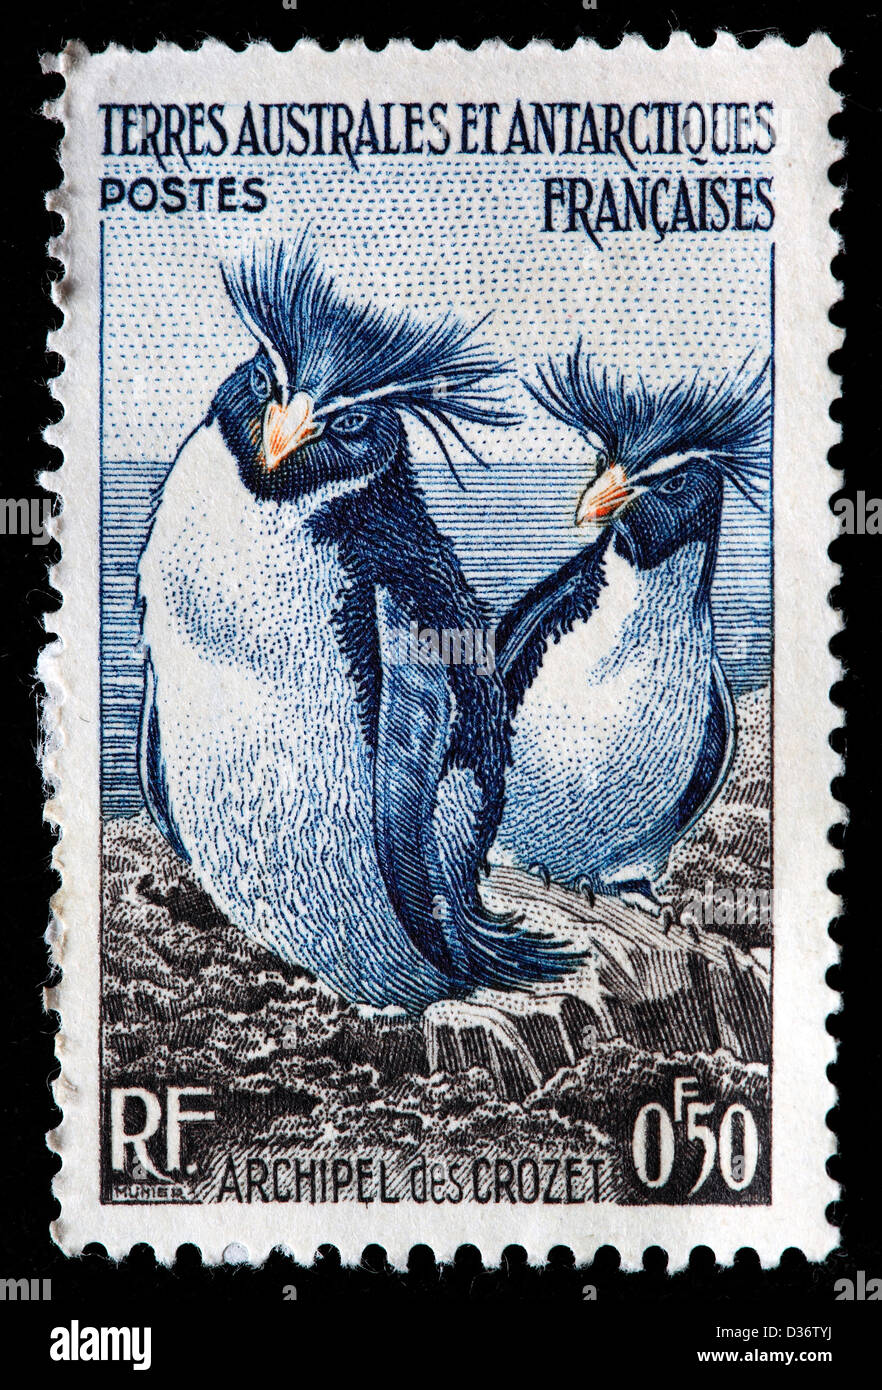 Rockhopper Penguins, Crozet Archipelago, postage stamp, French Southern and Antarctic Lands, 1956 Stock Photo